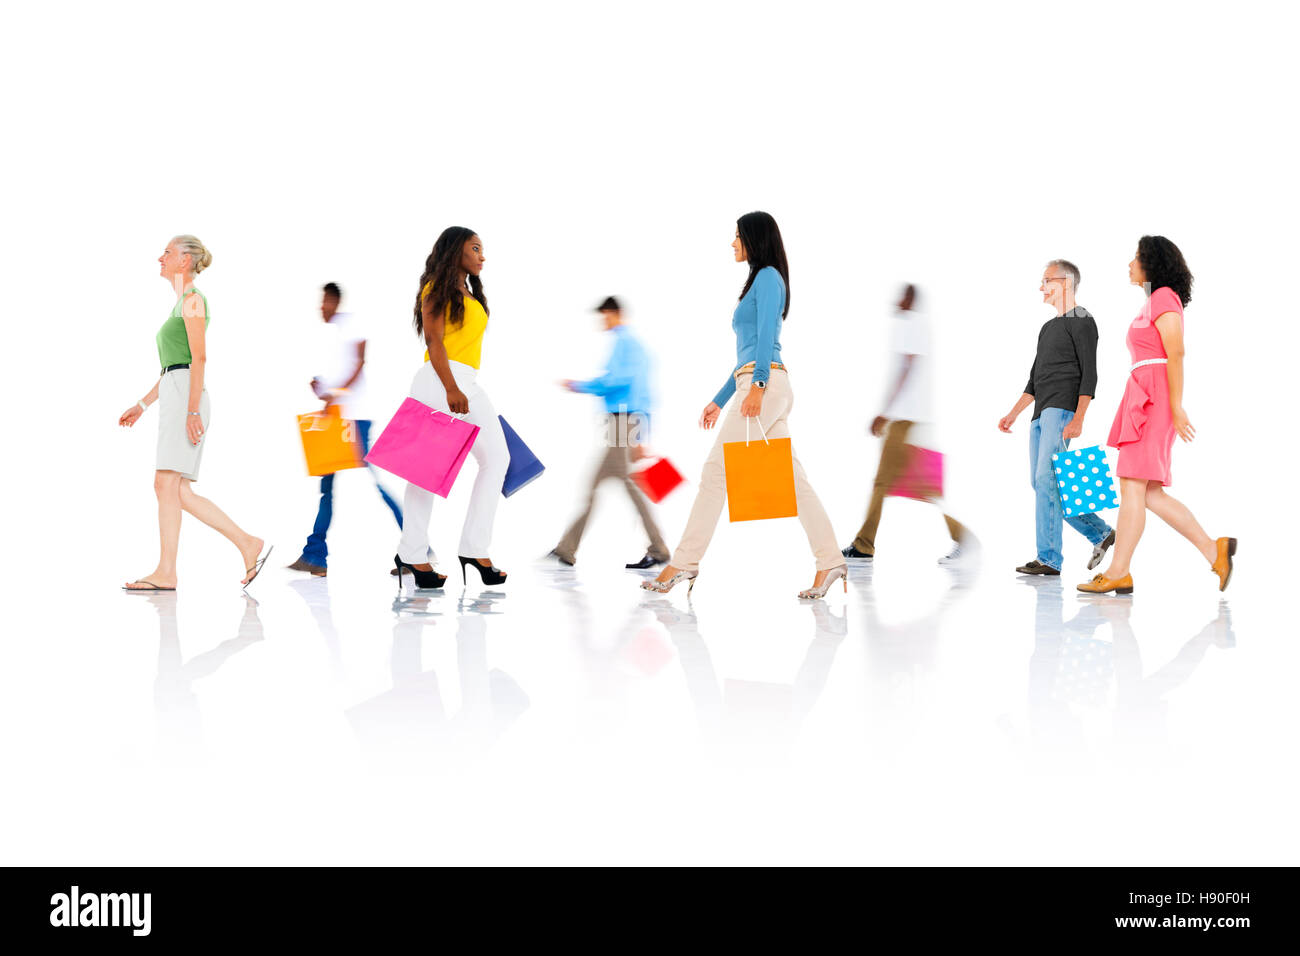 Shopping Purchase Retail Customer Consumer Sale Concept Stock Photo